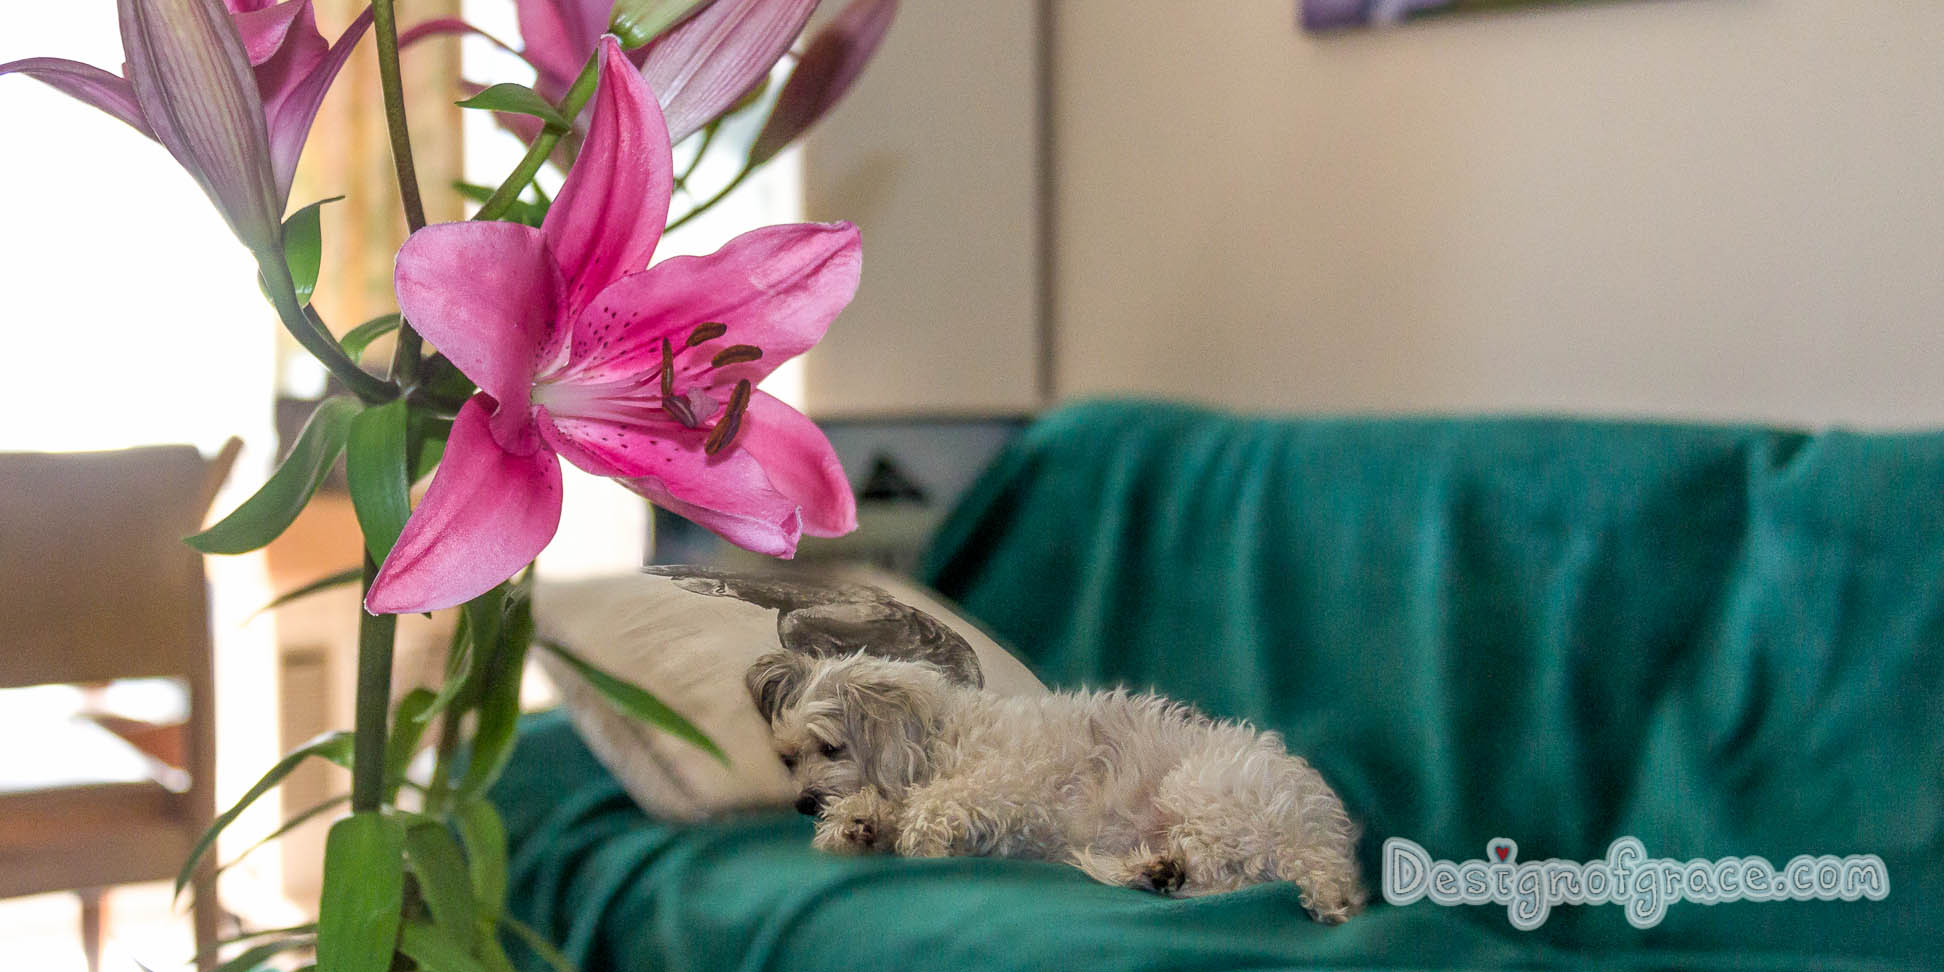 Penny thinks she is human.. she is sleeping on a pillow. Juxtapose with a beautiful blooming flower:)